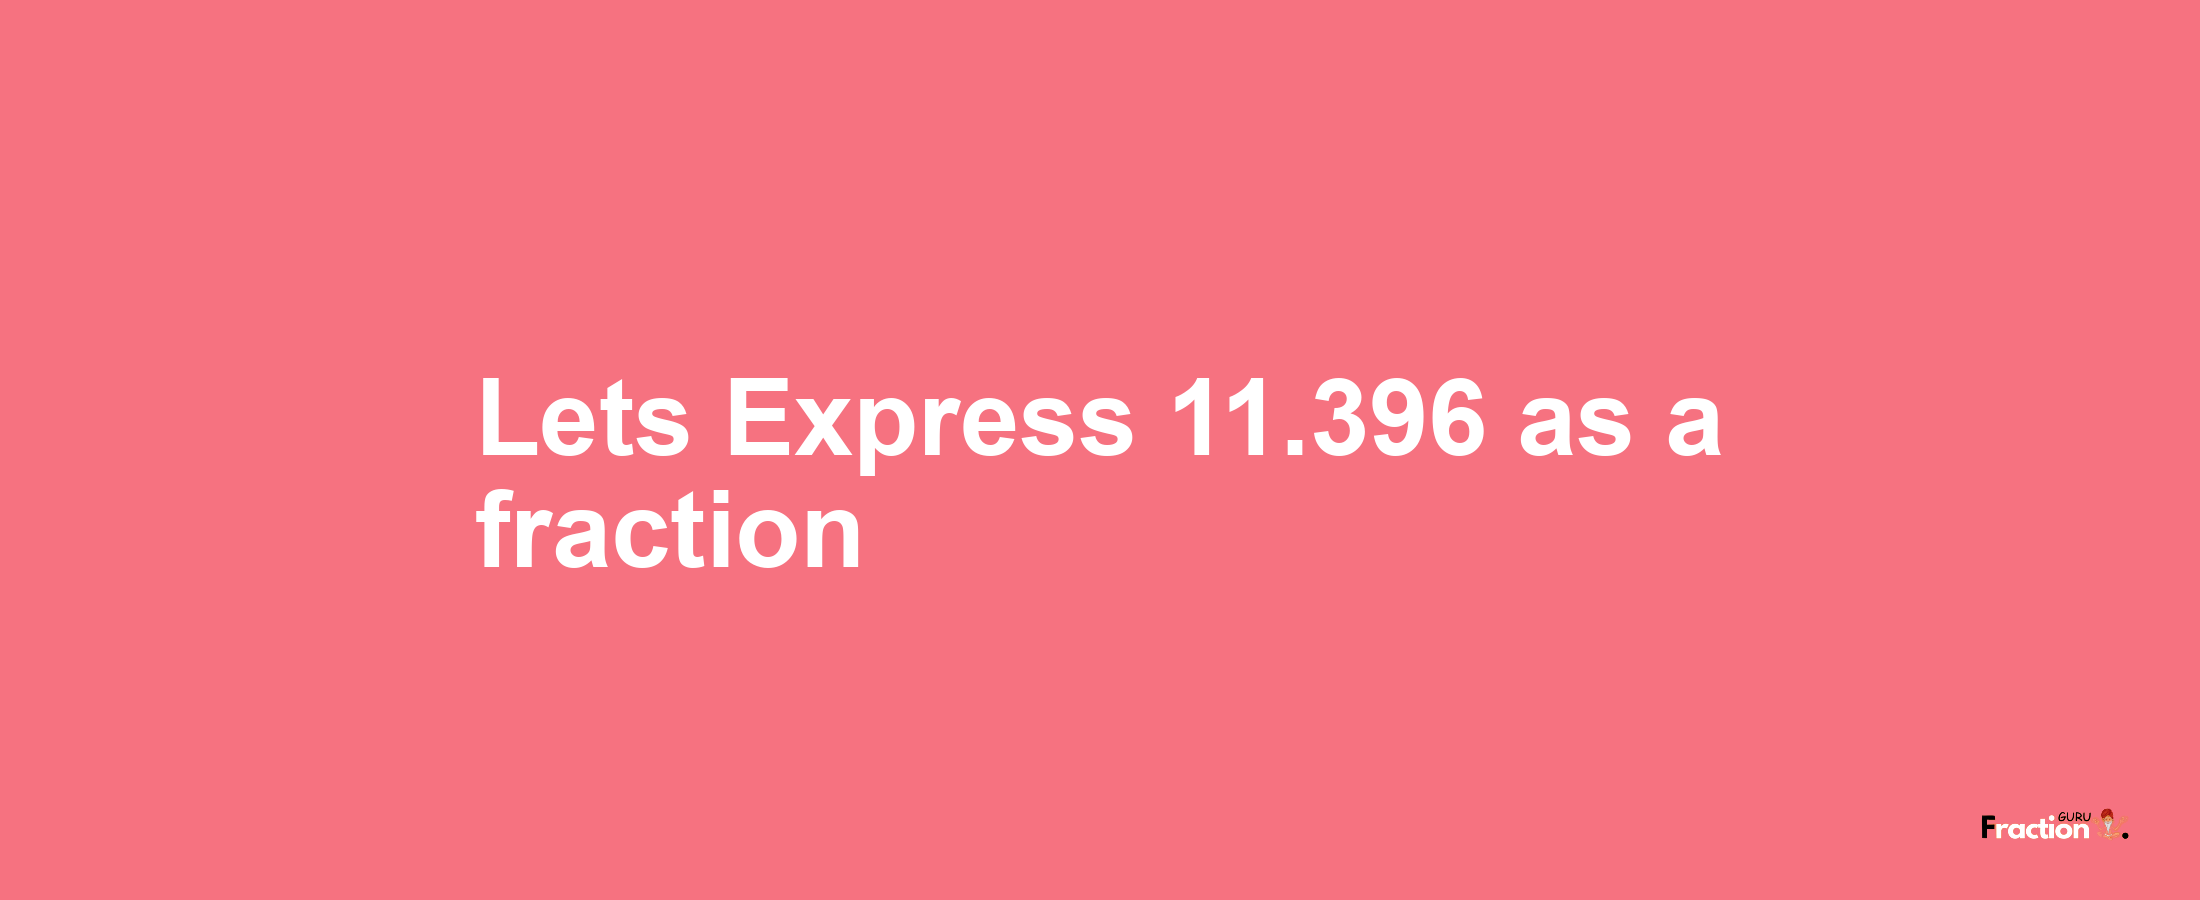 Lets Express 11.396 as afraction